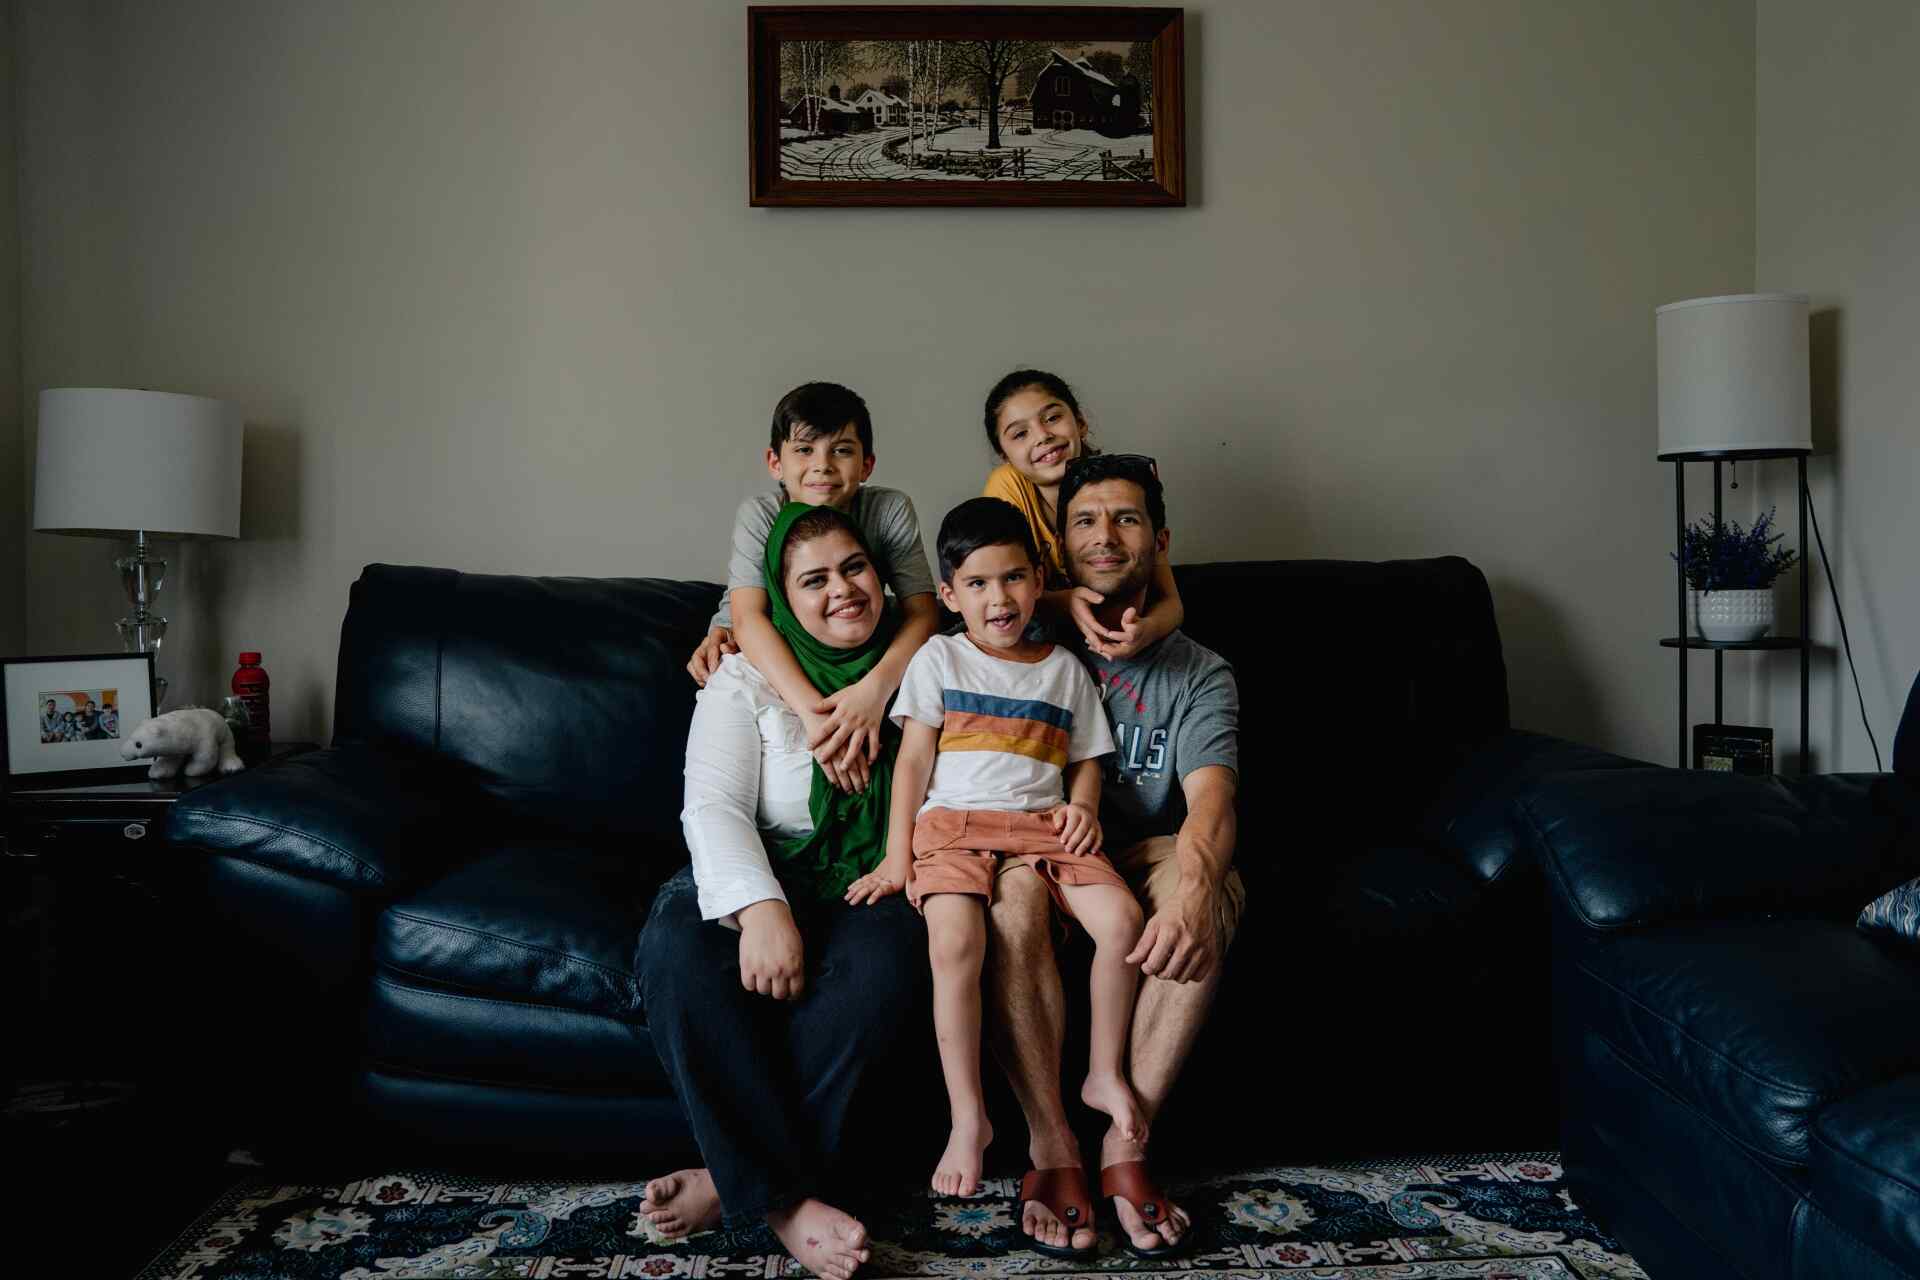 Two parents and three children pose for a portrait together on a black couch. The family was resettled after fleeing Afghanistan as refugees.